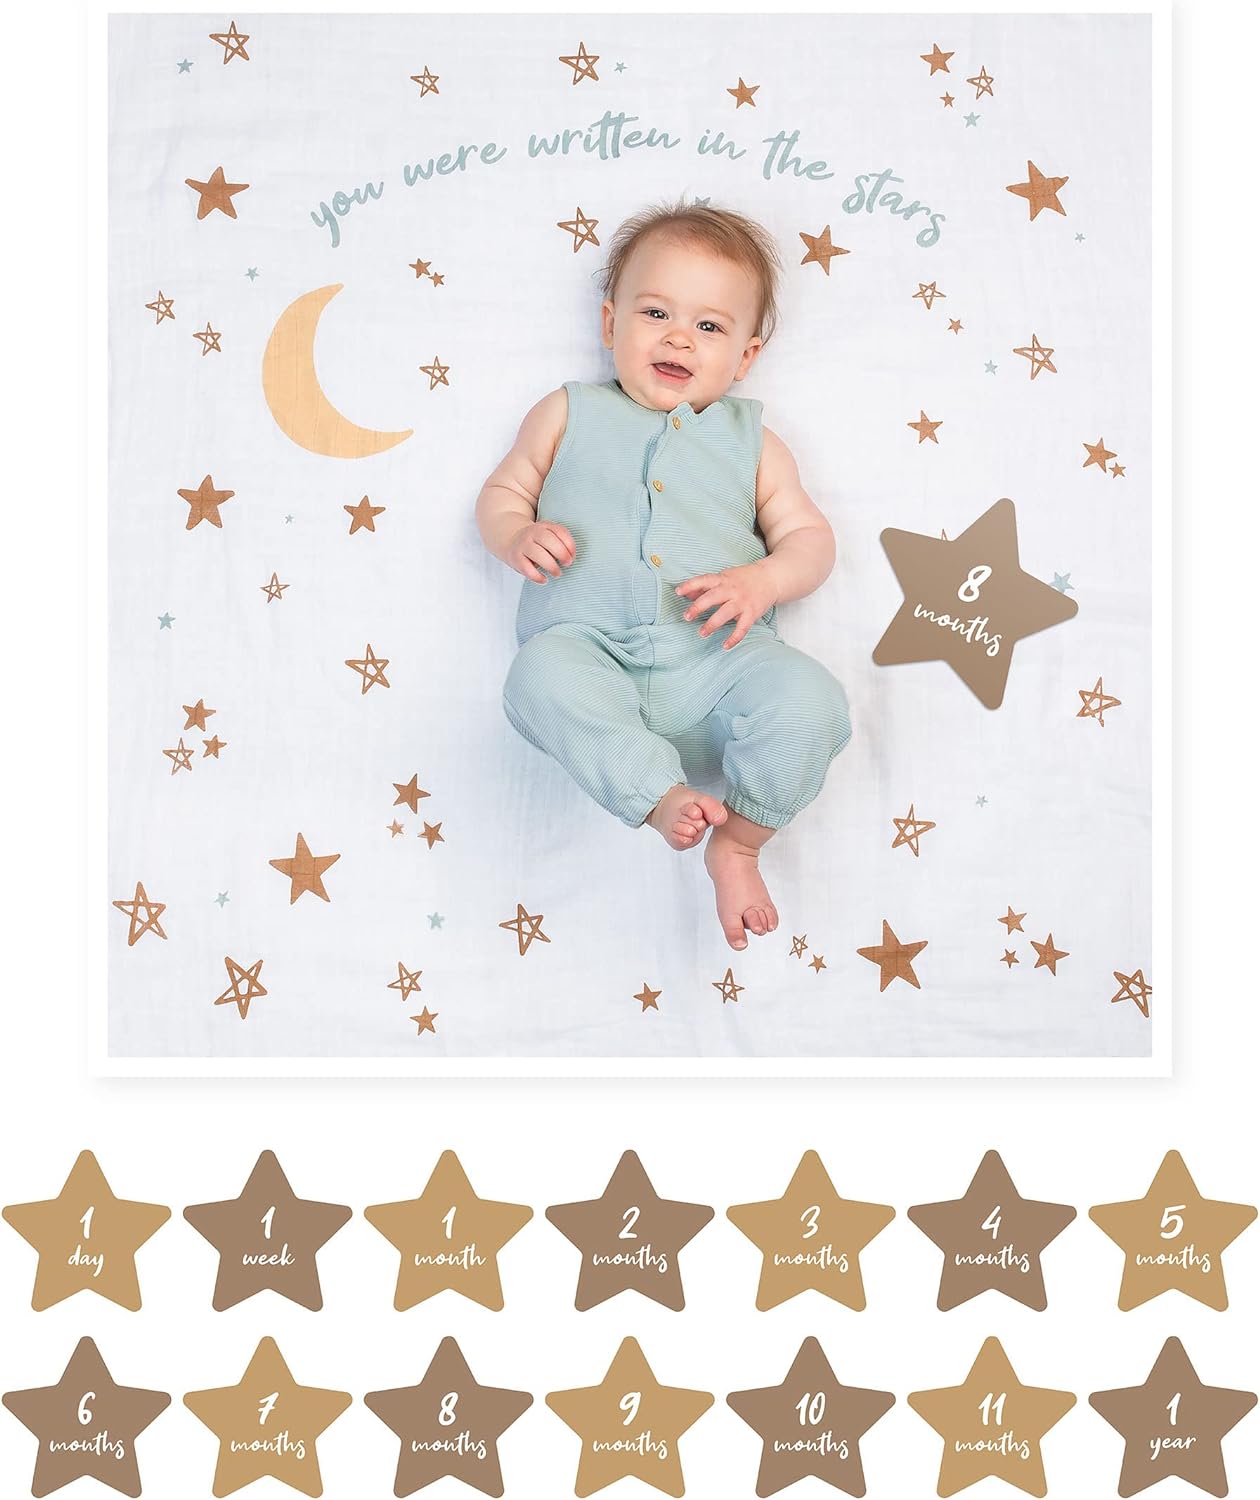 Gift set containing a white blanket with a starry design and 7 double-sided star milestone cards